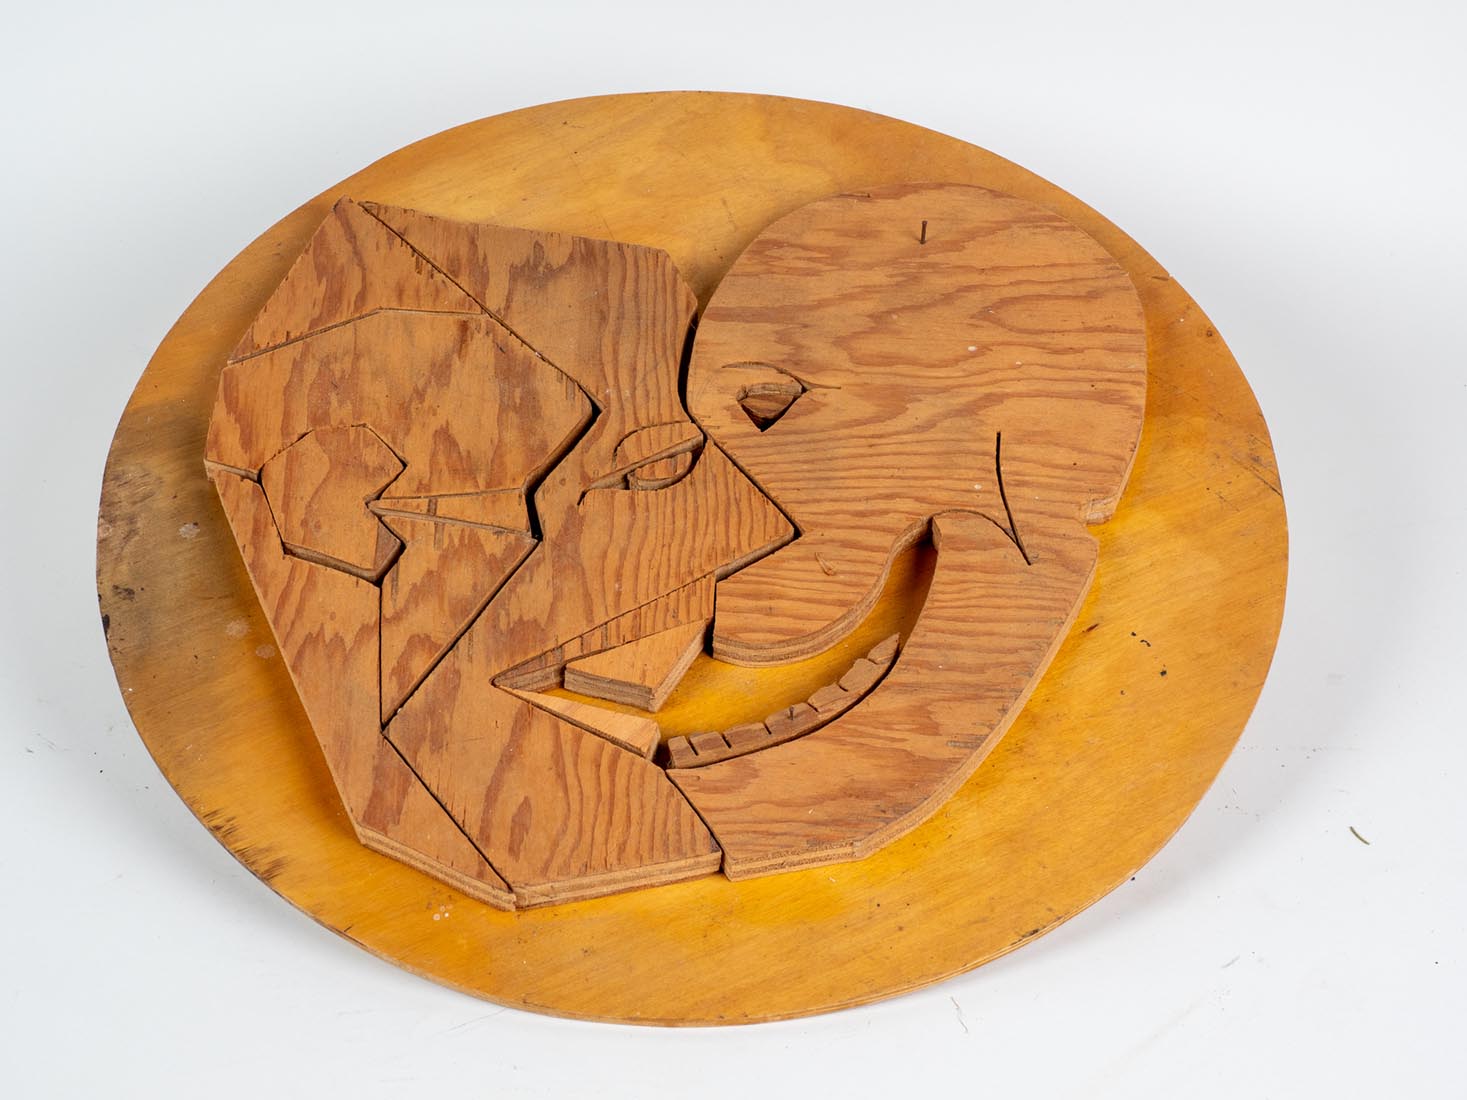 wood sculpture by Marjorie White Williams